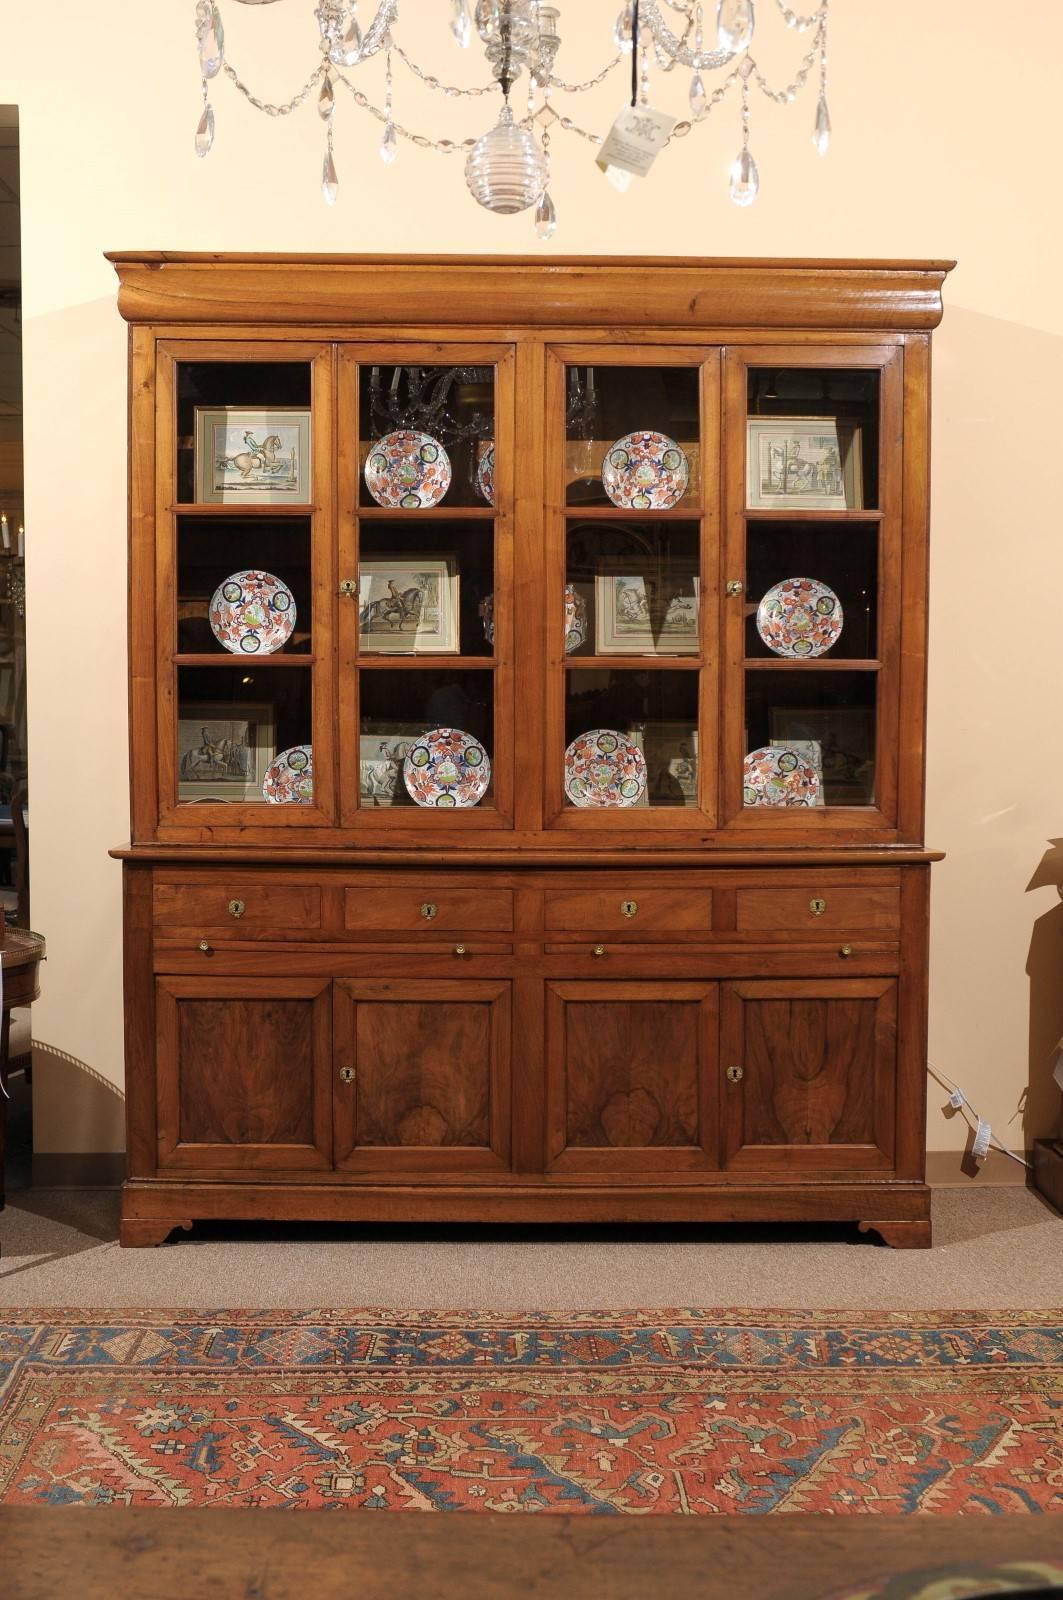 19th century French Louis Philippe walnut bookcase with four glass panel doors, four drawers and cabinet below.
    
   